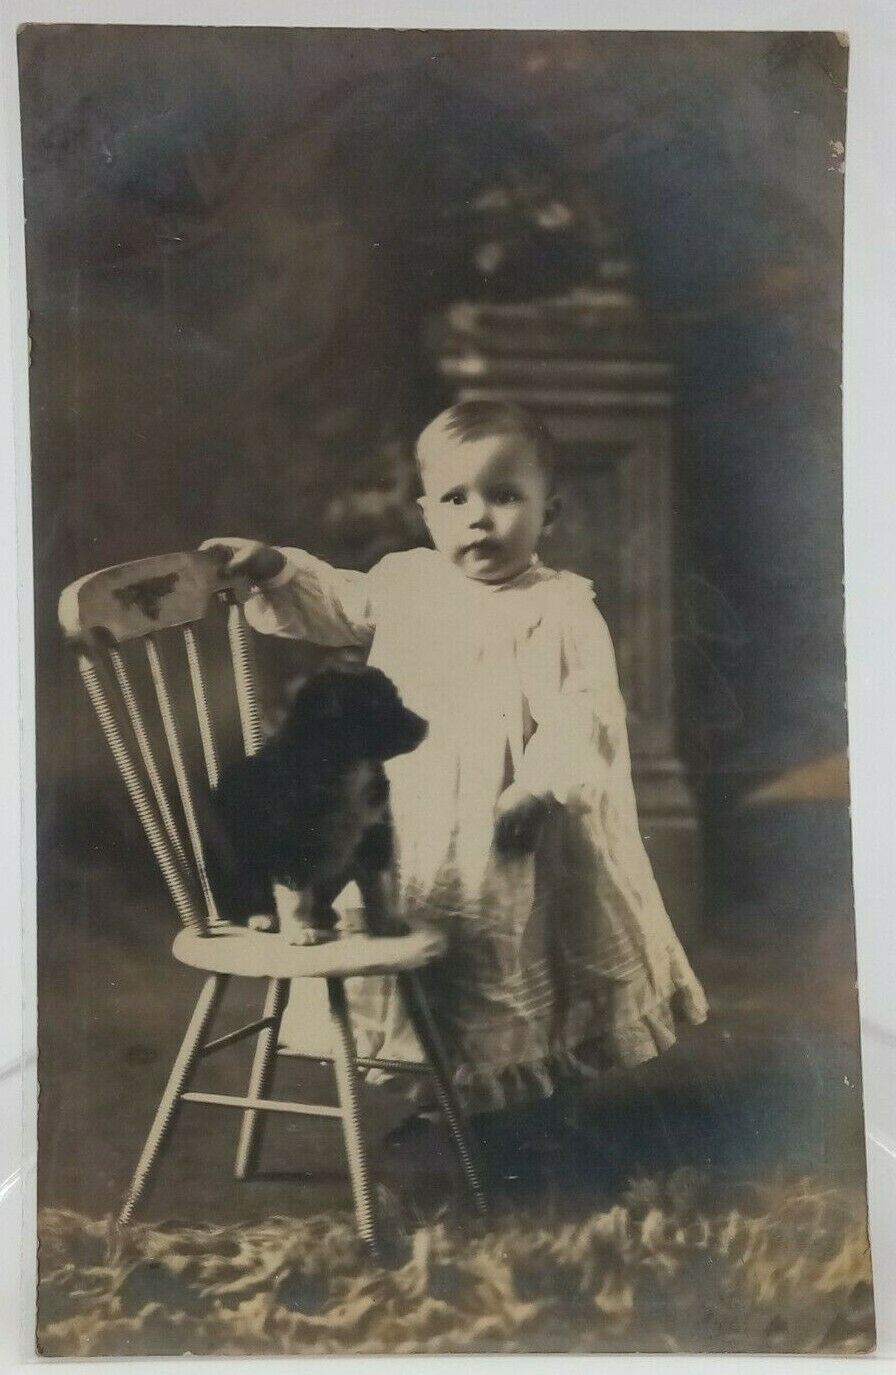 ANTIQUE EARLY 1900s Postcards  * CHILDREN * puppy, dog, chair, baby cute outfit